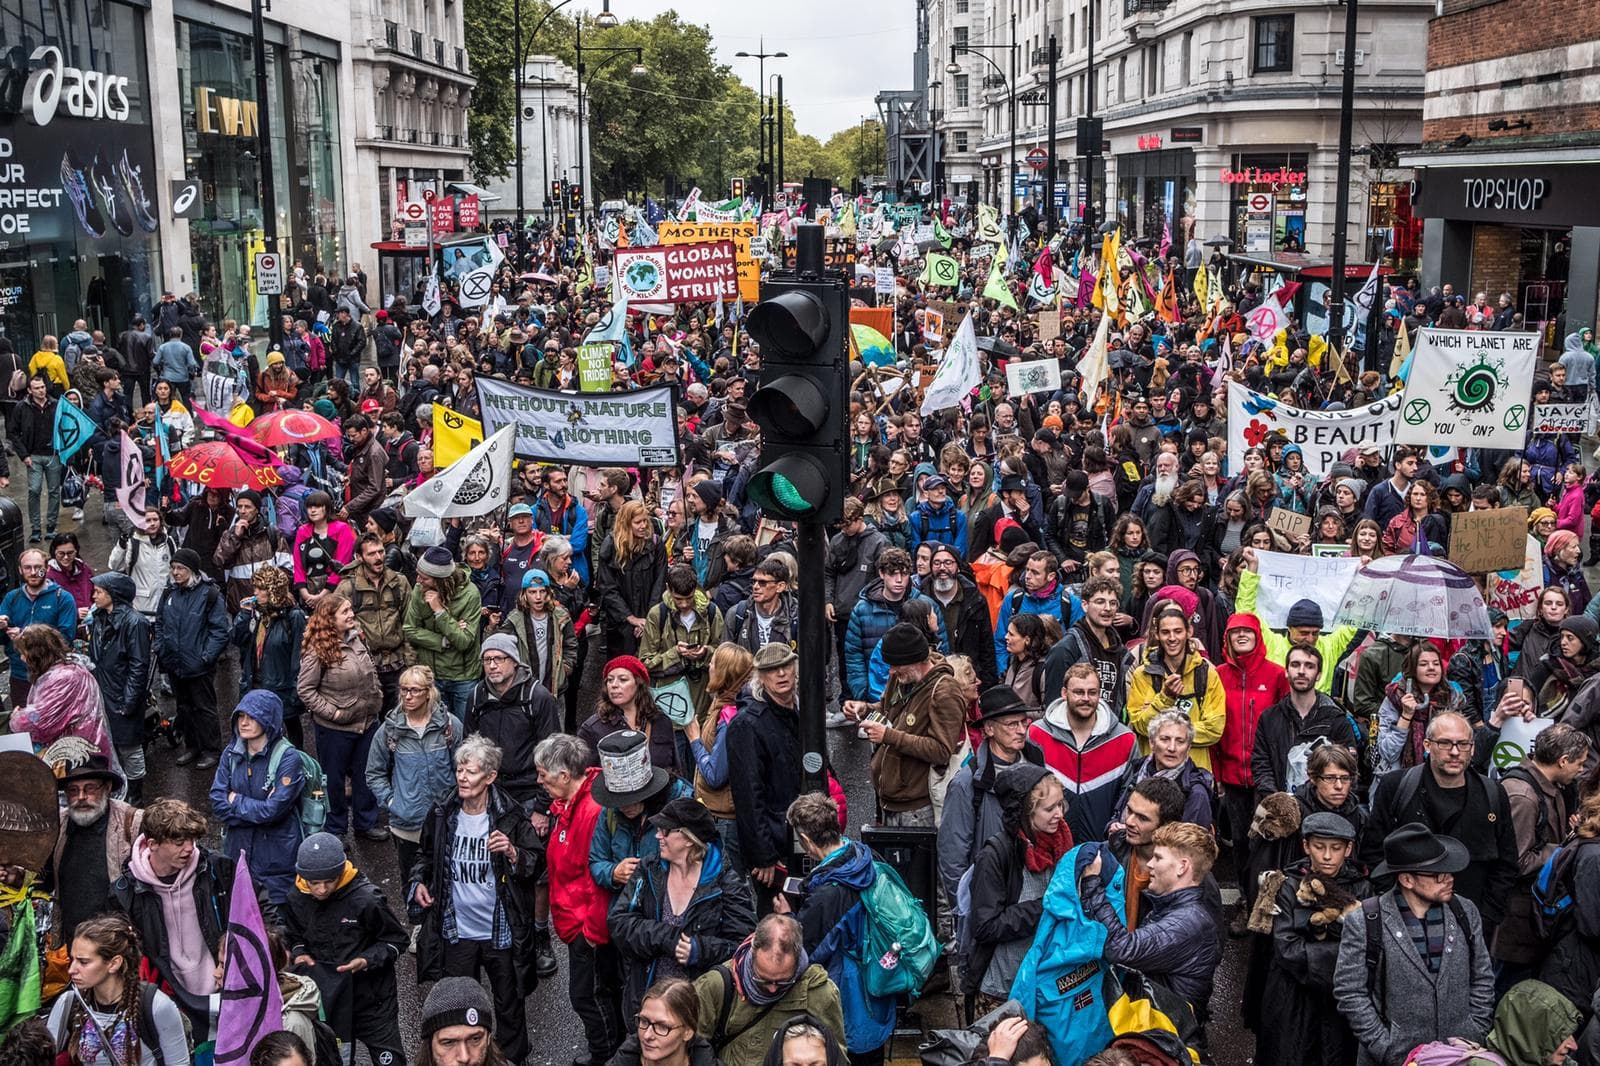 A massive march with thousands of rebels on Oxford Street in London. There are banners which read 'Global Women's Strike' and 'Without Nature We Are Nothing'.